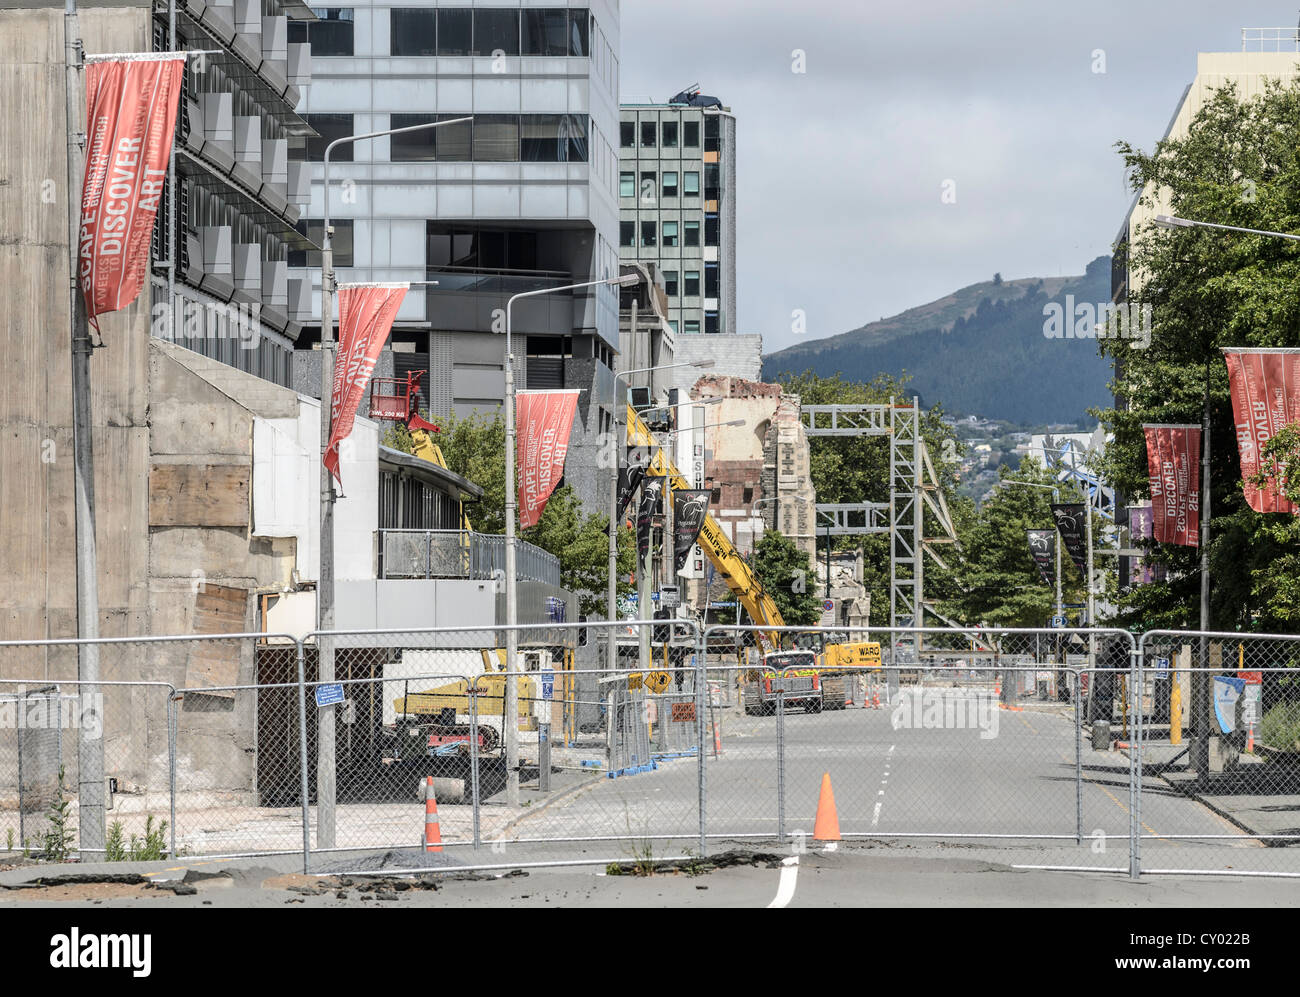 Fence, border of the evacuated CBD Red Zone, city cente of Christchurch, damaged by earthquakes, South Island, New Zealand Stock Photo